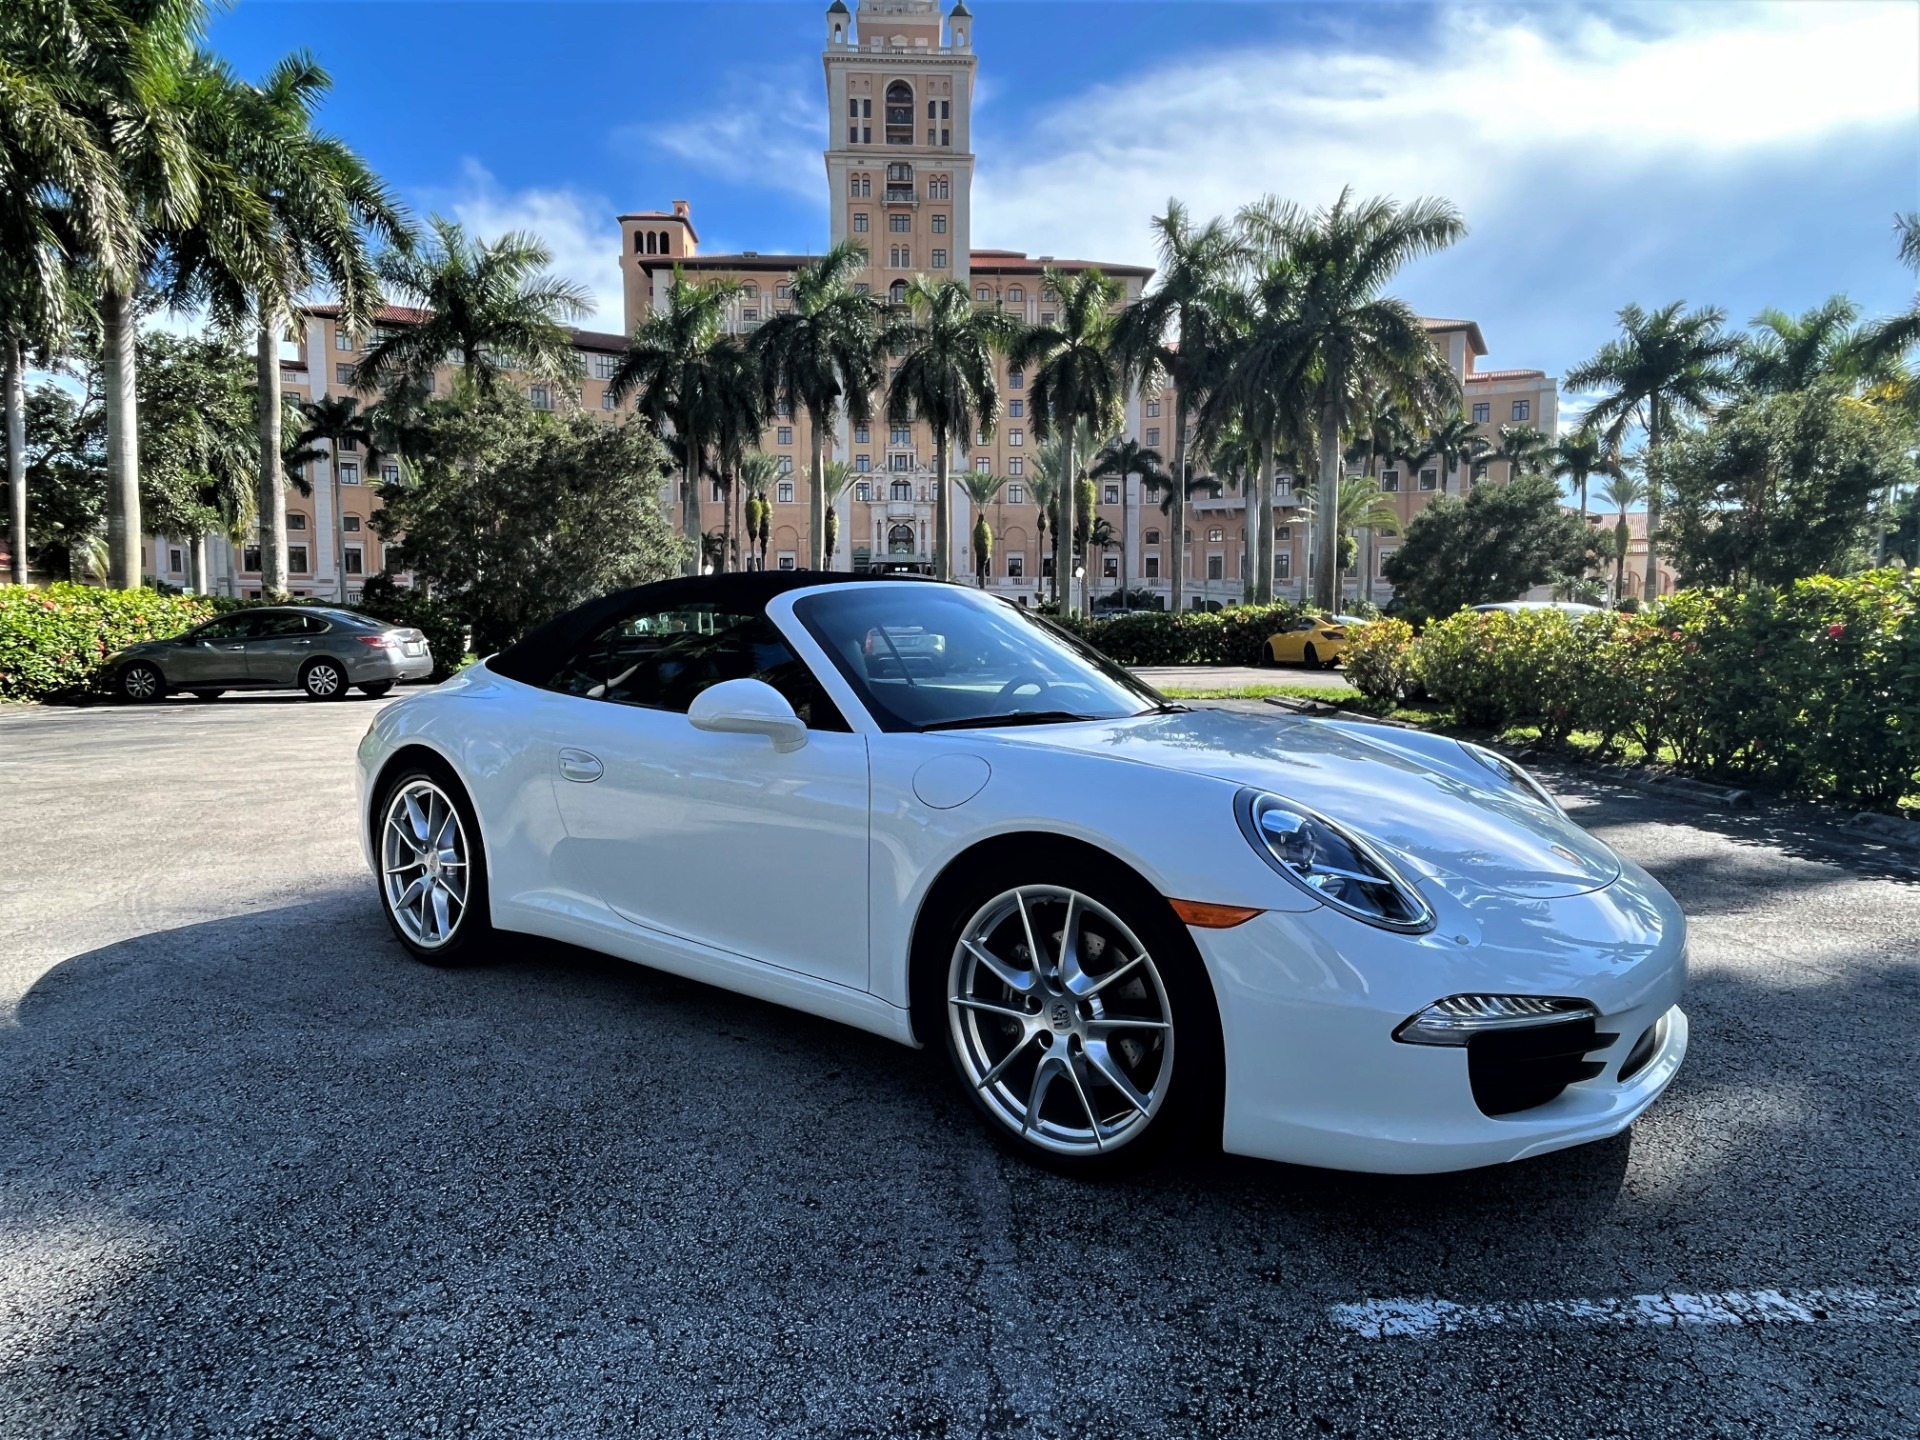 Used 2014 Porsche 911 Carrera for sale Sold at The Gables Sports Cars in Miami FL 33146 2